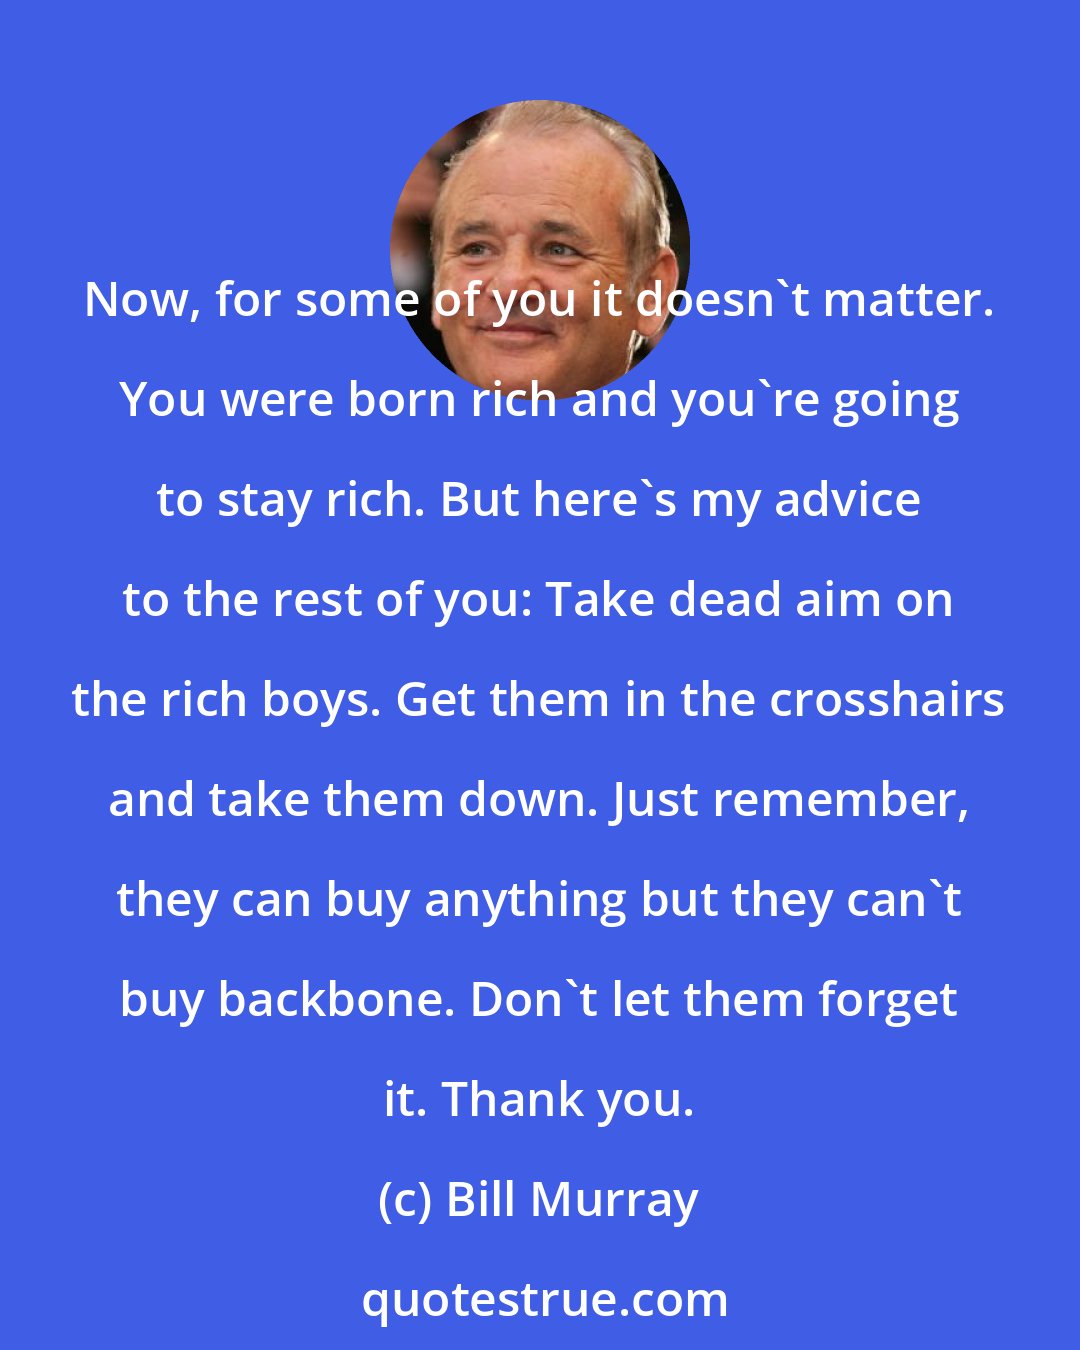 Bill Murray: Now, for some of you it doesn't matter. You were born rich and you're going to stay rich. But here's my advice to the rest of you: Take dead aim on the rich boys. Get them in the crosshairs and take them down. Just remember, they can buy anything but they can't buy backbone. Don't let them forget it. Thank you.